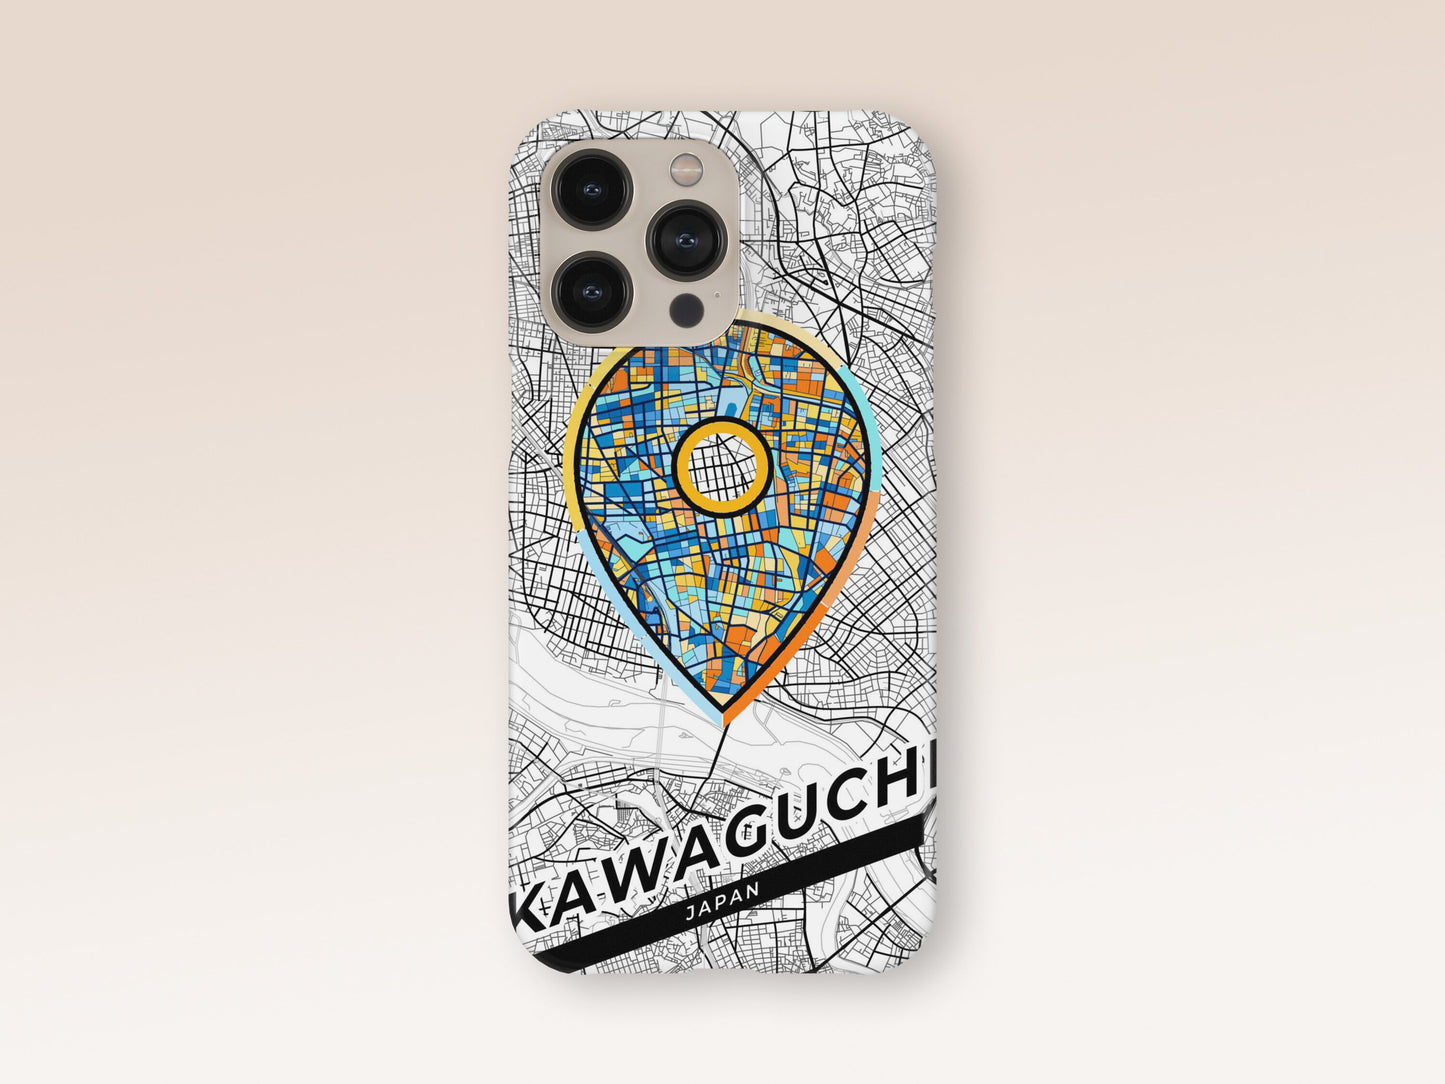 Kawaguchi Japan slim phone case with colorful icon. Birthday, wedding or housewarming gift. Couple match cases. 1